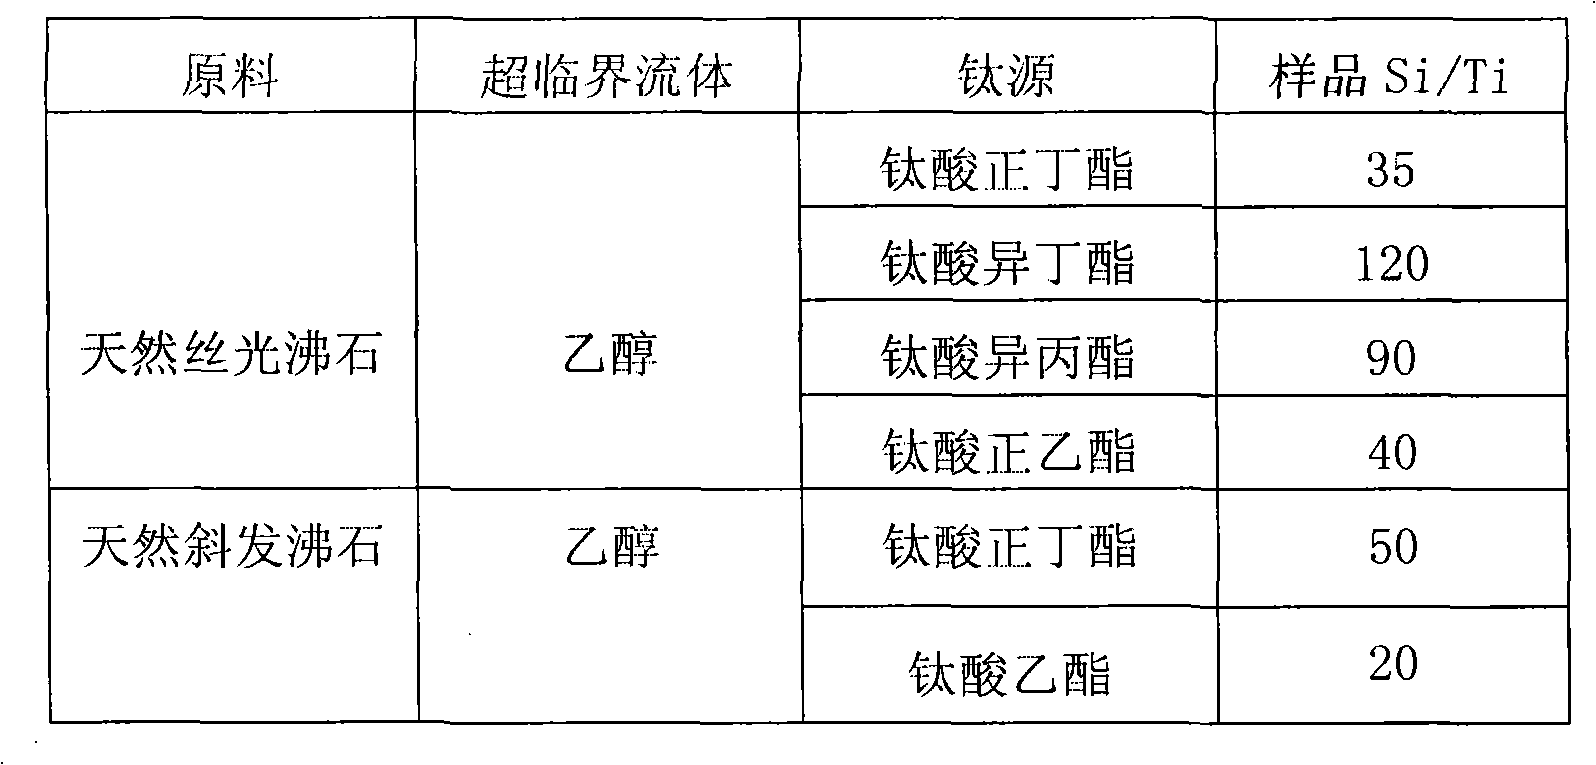 Method for preparing titanium-silicalite molecular sieve from natural zeolite through supercritical replacement and modification